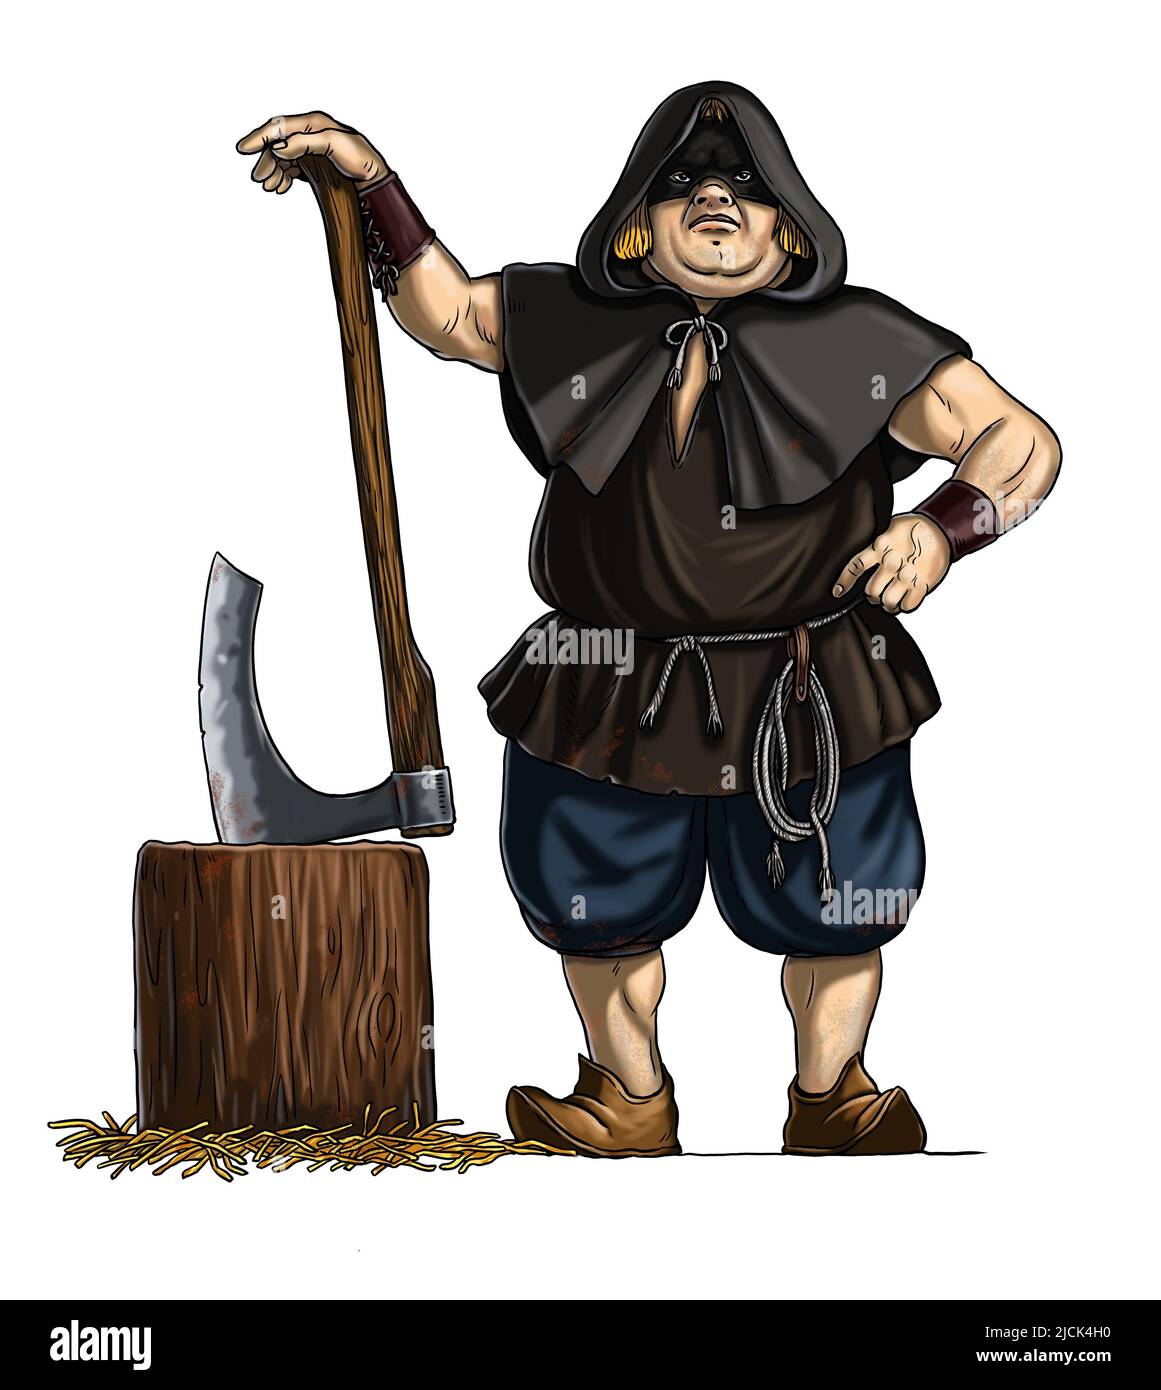 Medieval executioner with an ax. Digital illustration with headsman. Stock Photo